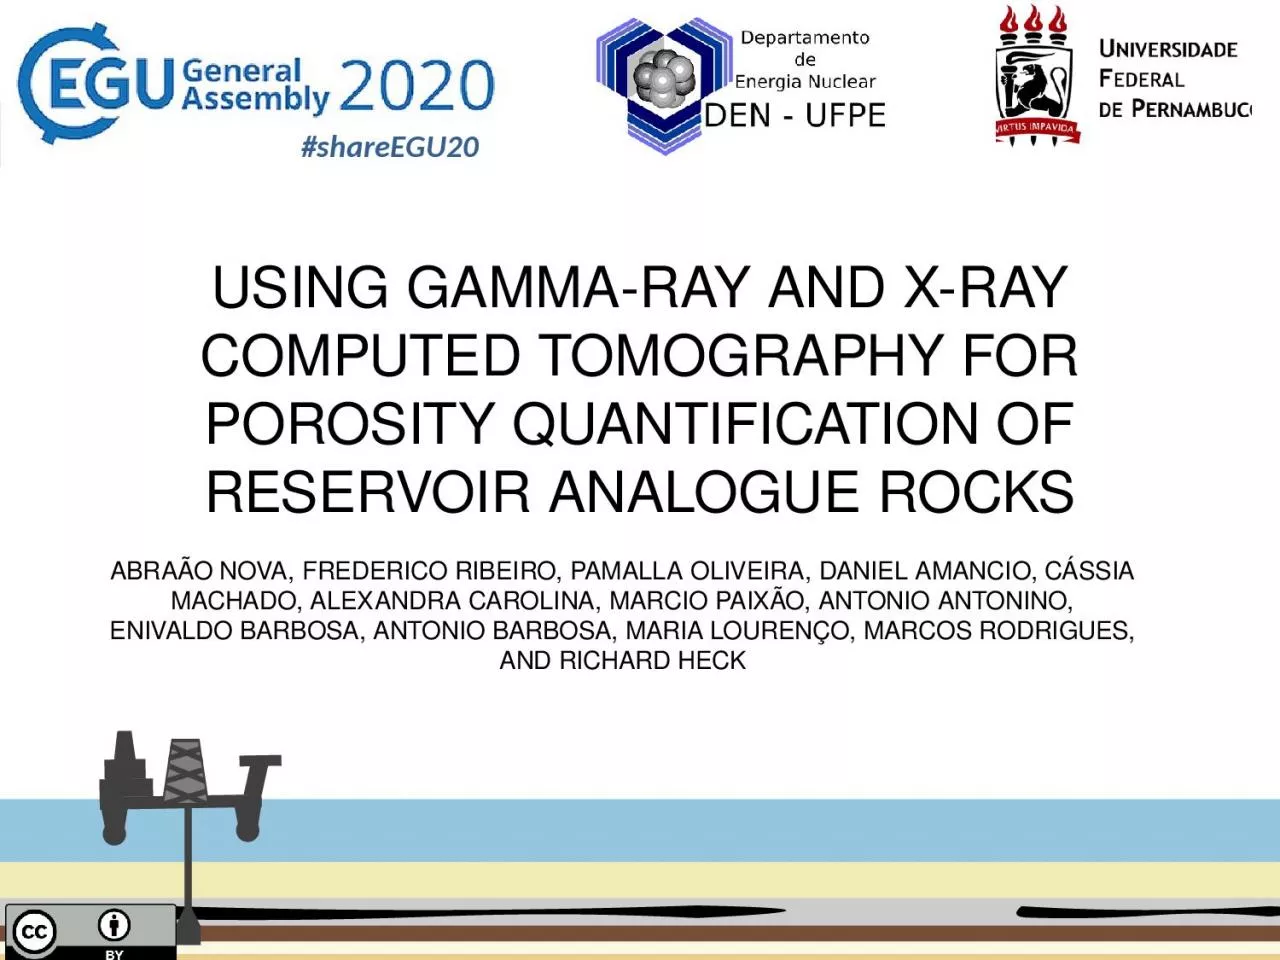 USING GAMMA-RAY AND X-RAY COMPUTED TOMOGRAPHY FOR POROSITY QUANTIFICATION OF RESERVOIR